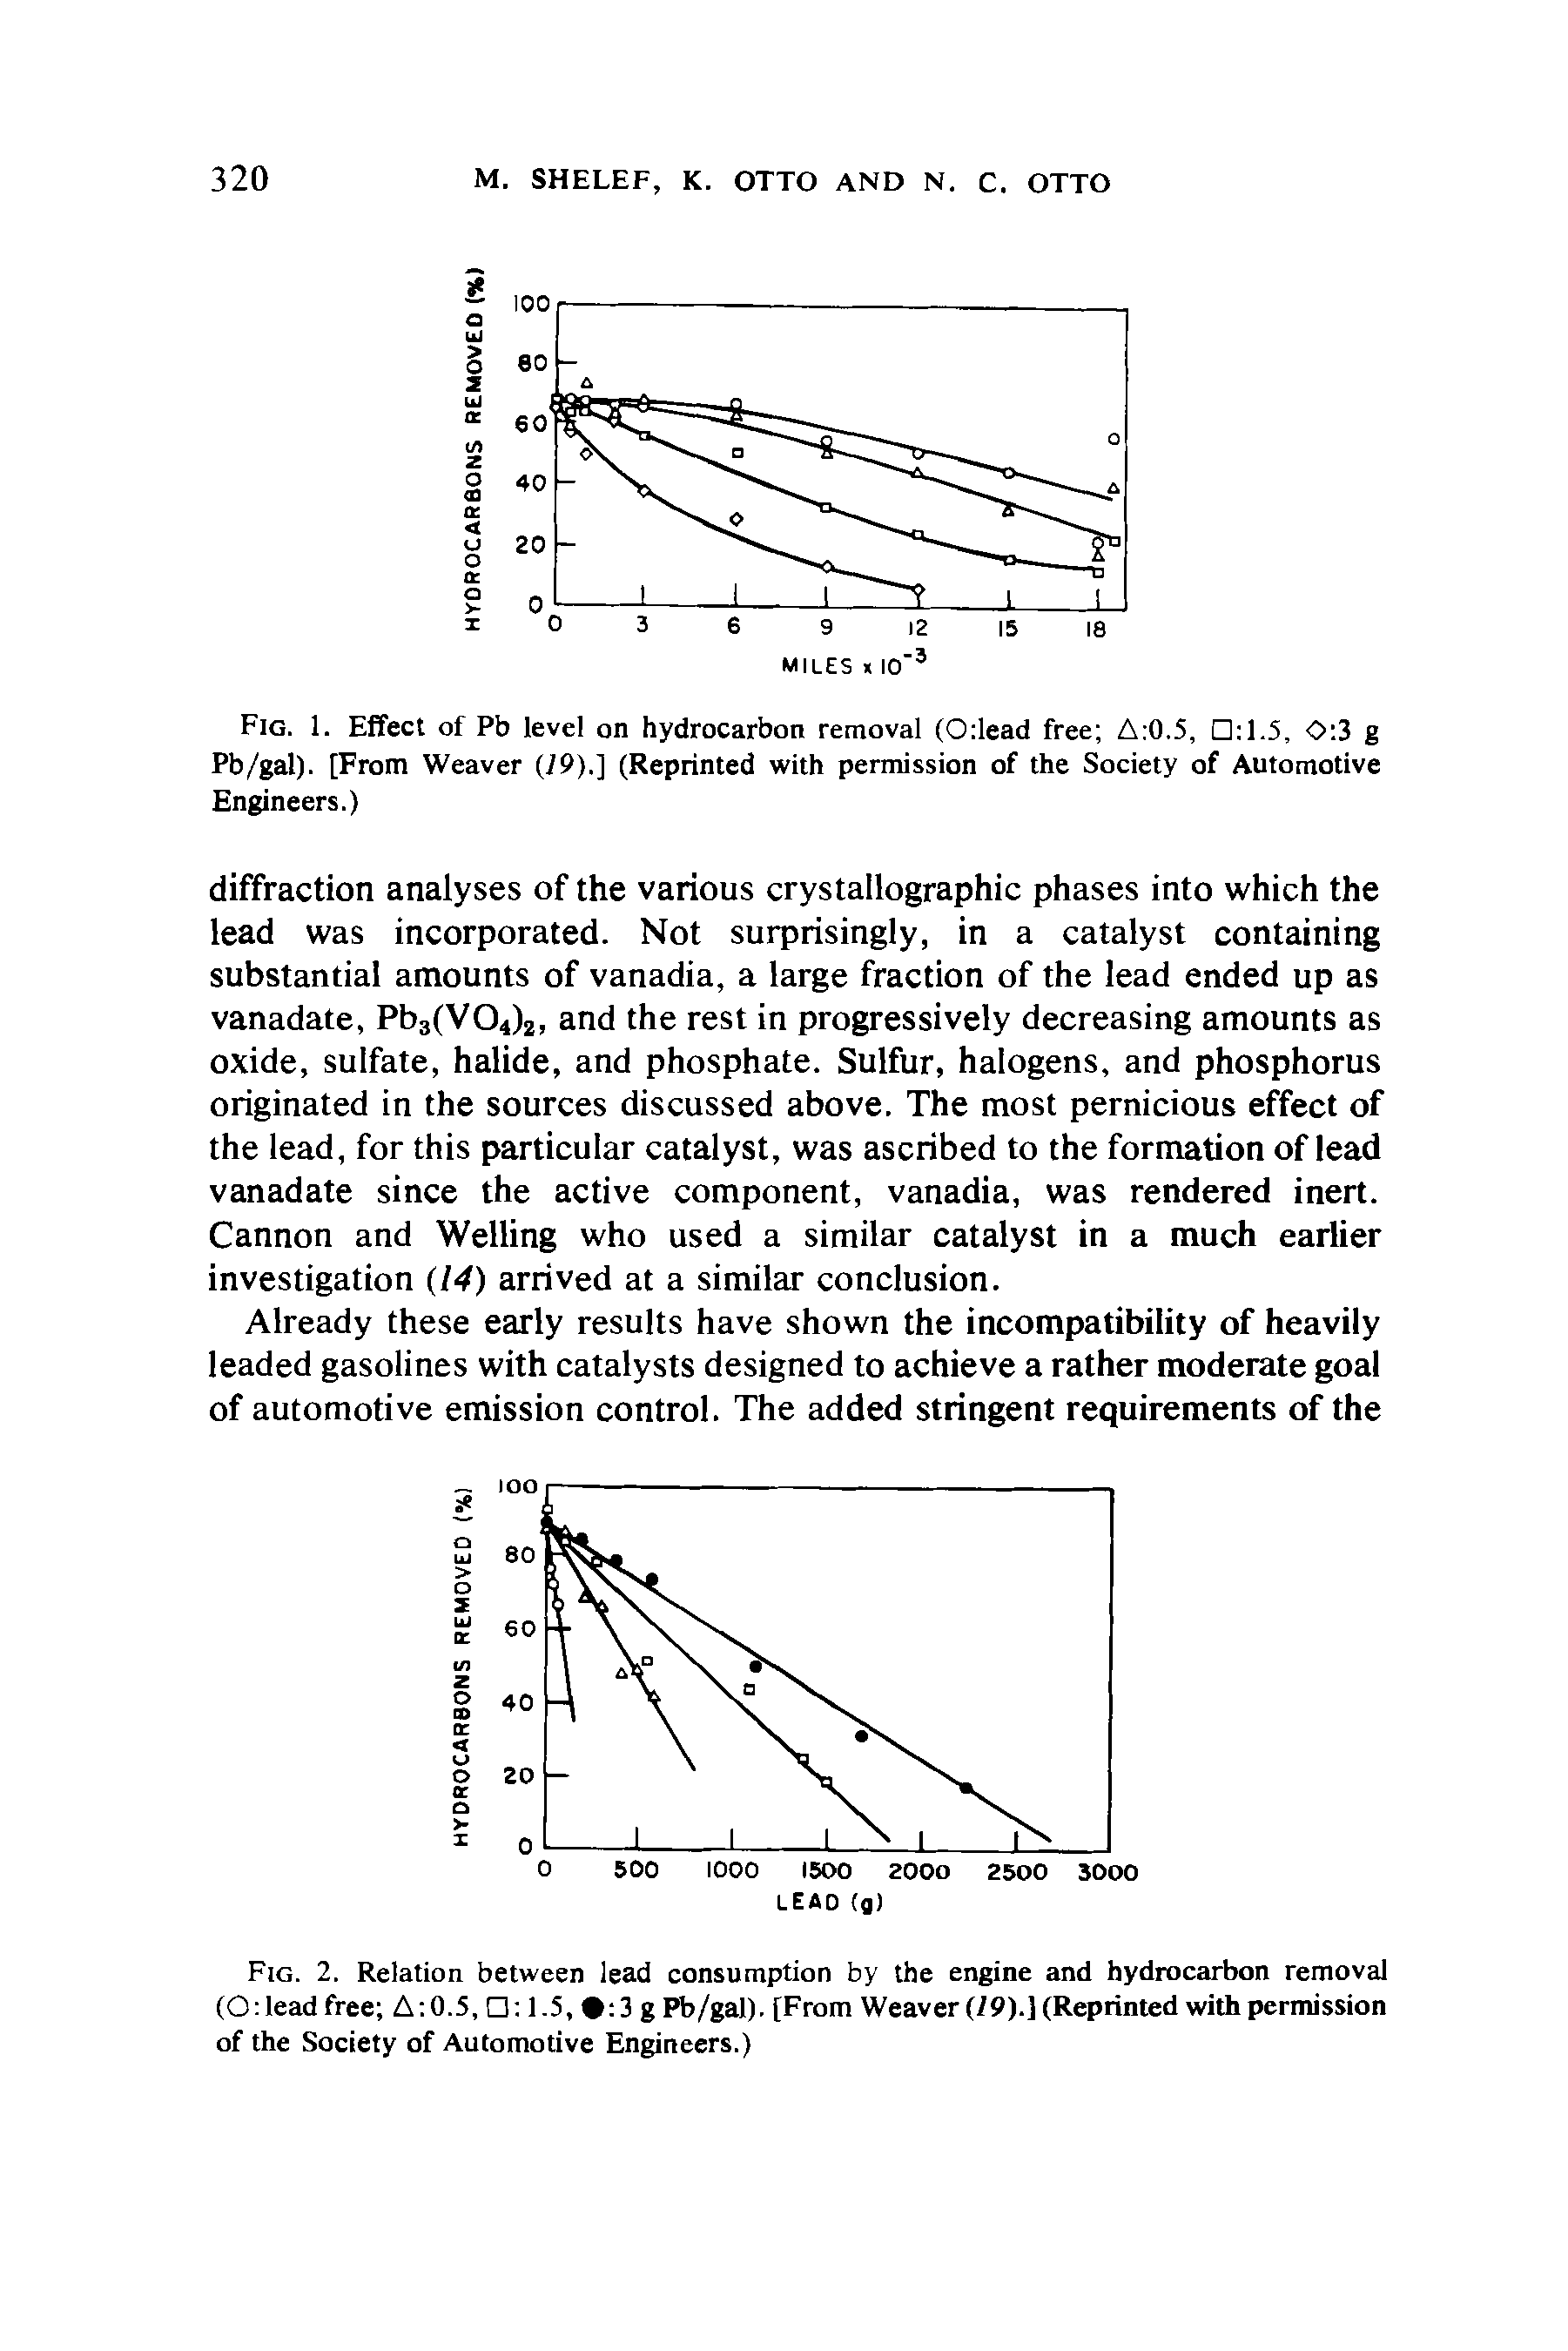 Fig. 1. Effect of Pb level on hydrocarbon removal (Oilead free A 0.5, Ckl.5, 0 3 g Pb/gal). [From Weaver (79).] (Reprinted with permission of the Society of Automotive Engineers.)...